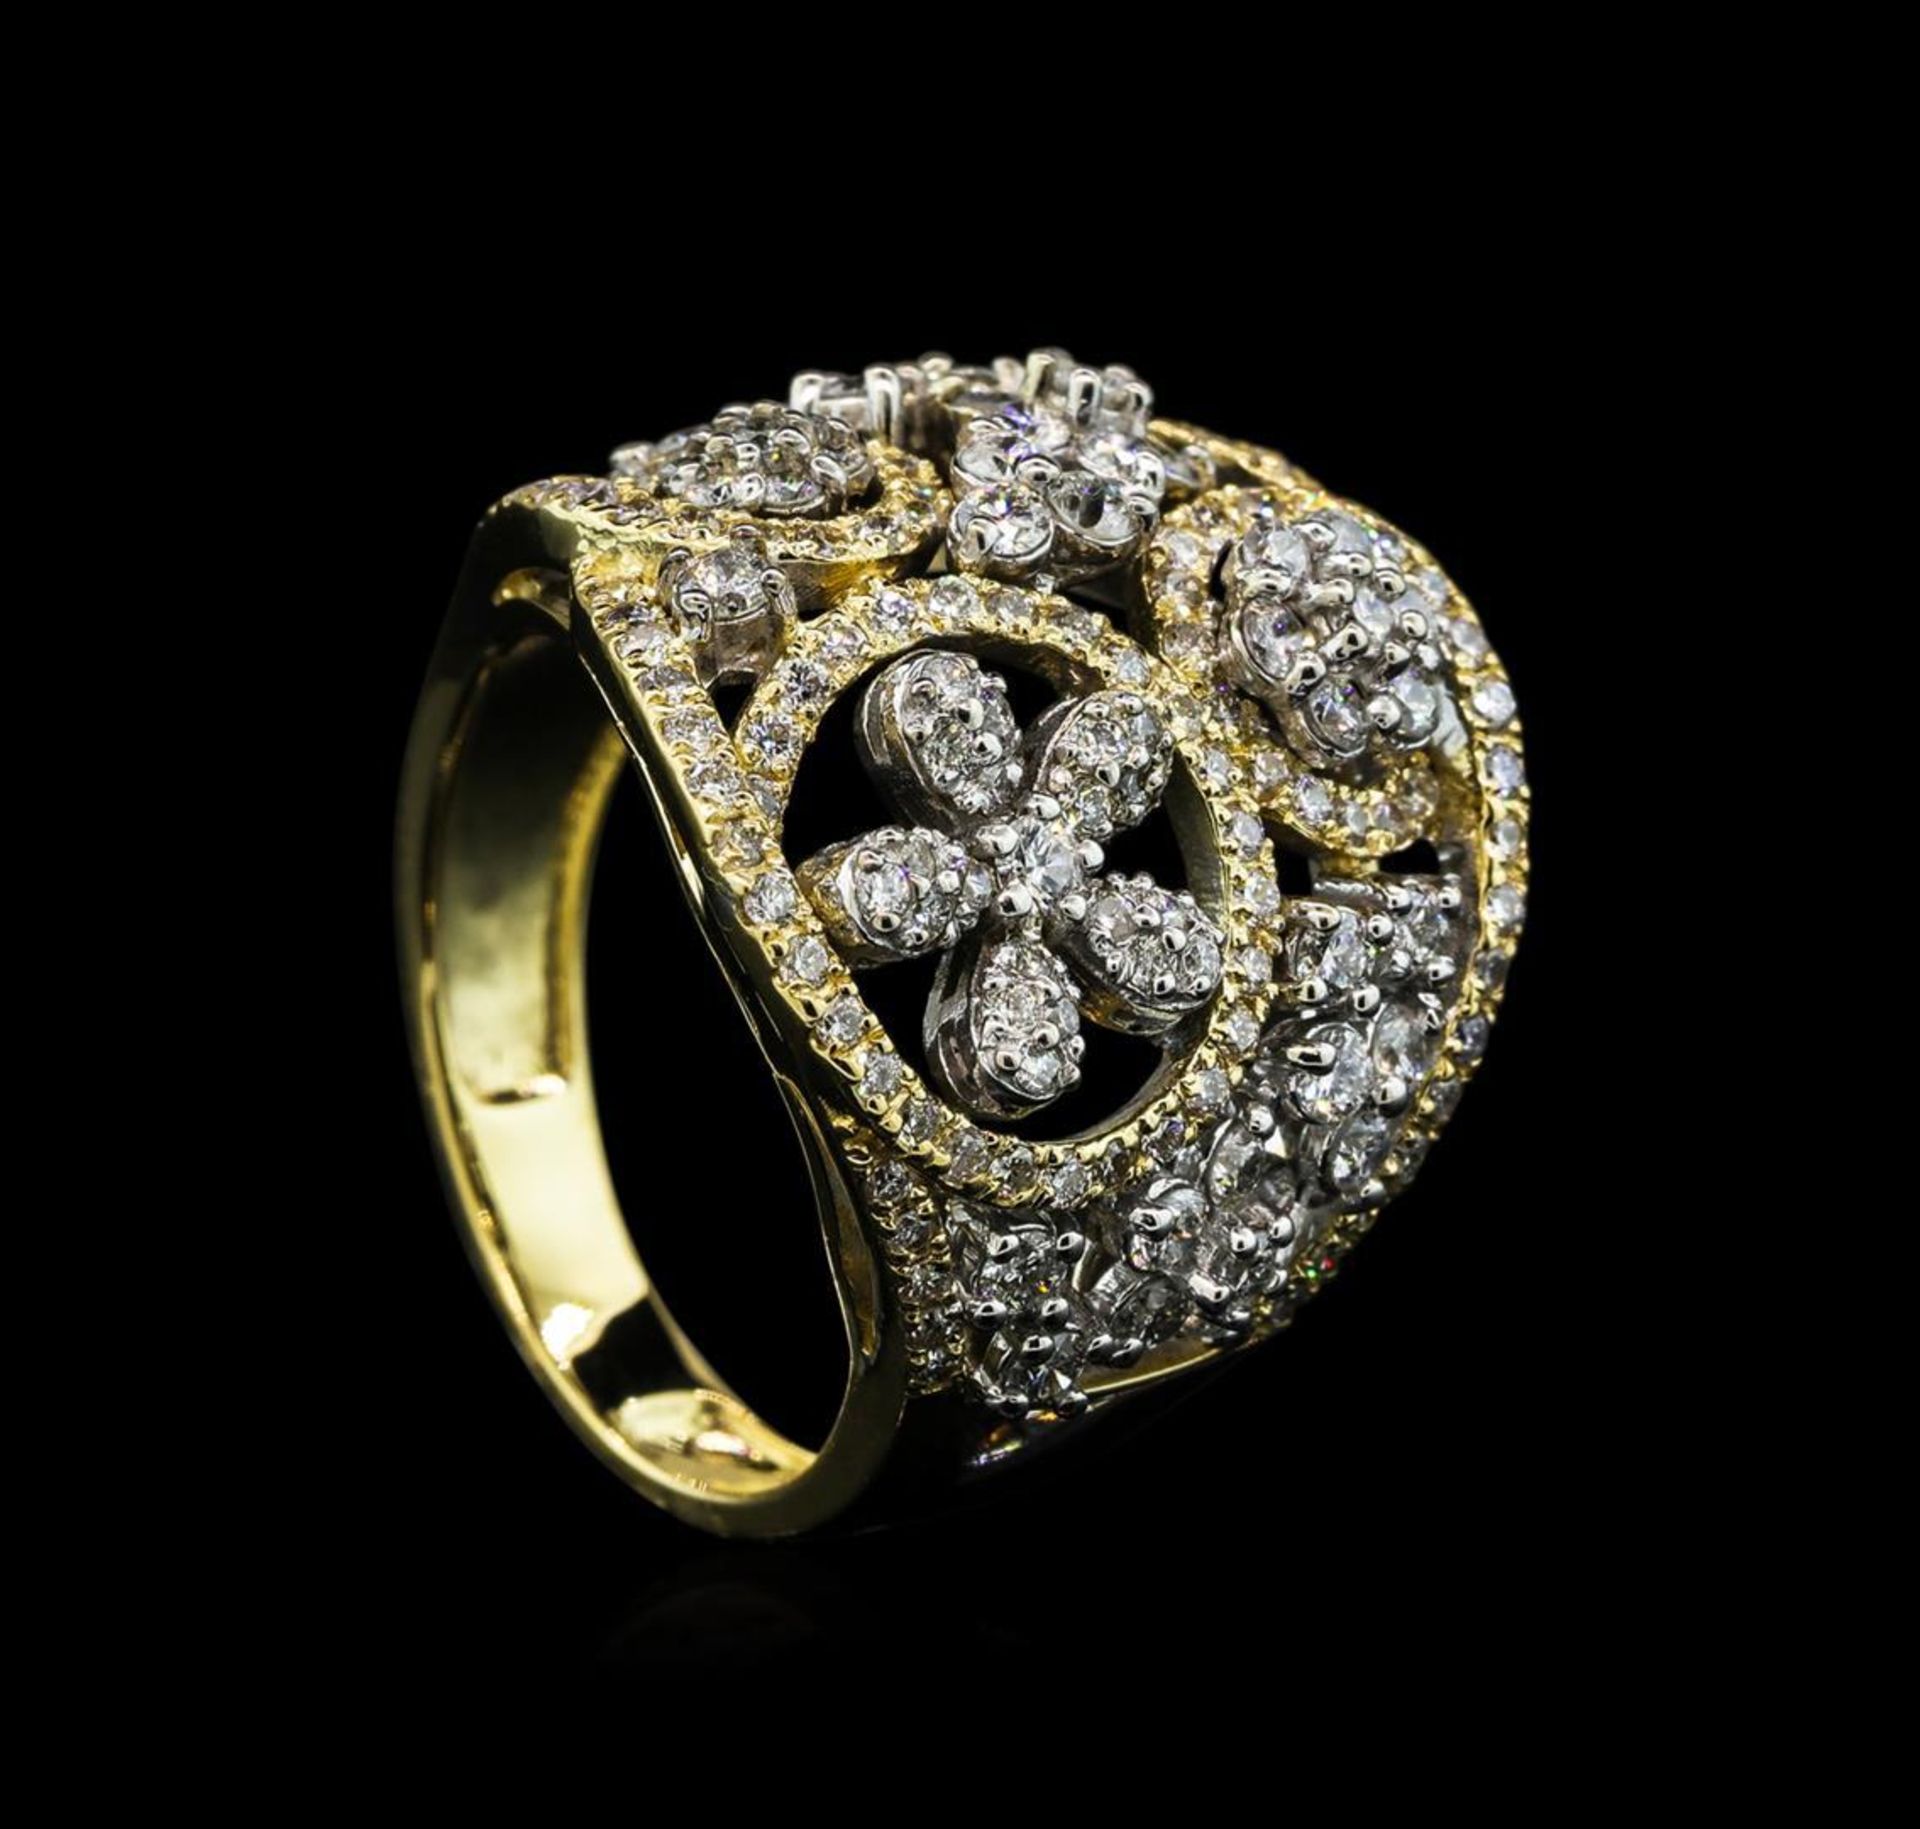 1.12 ctw Diamond Ring - 14KT Yellow and White Gold - Image 4 of 5